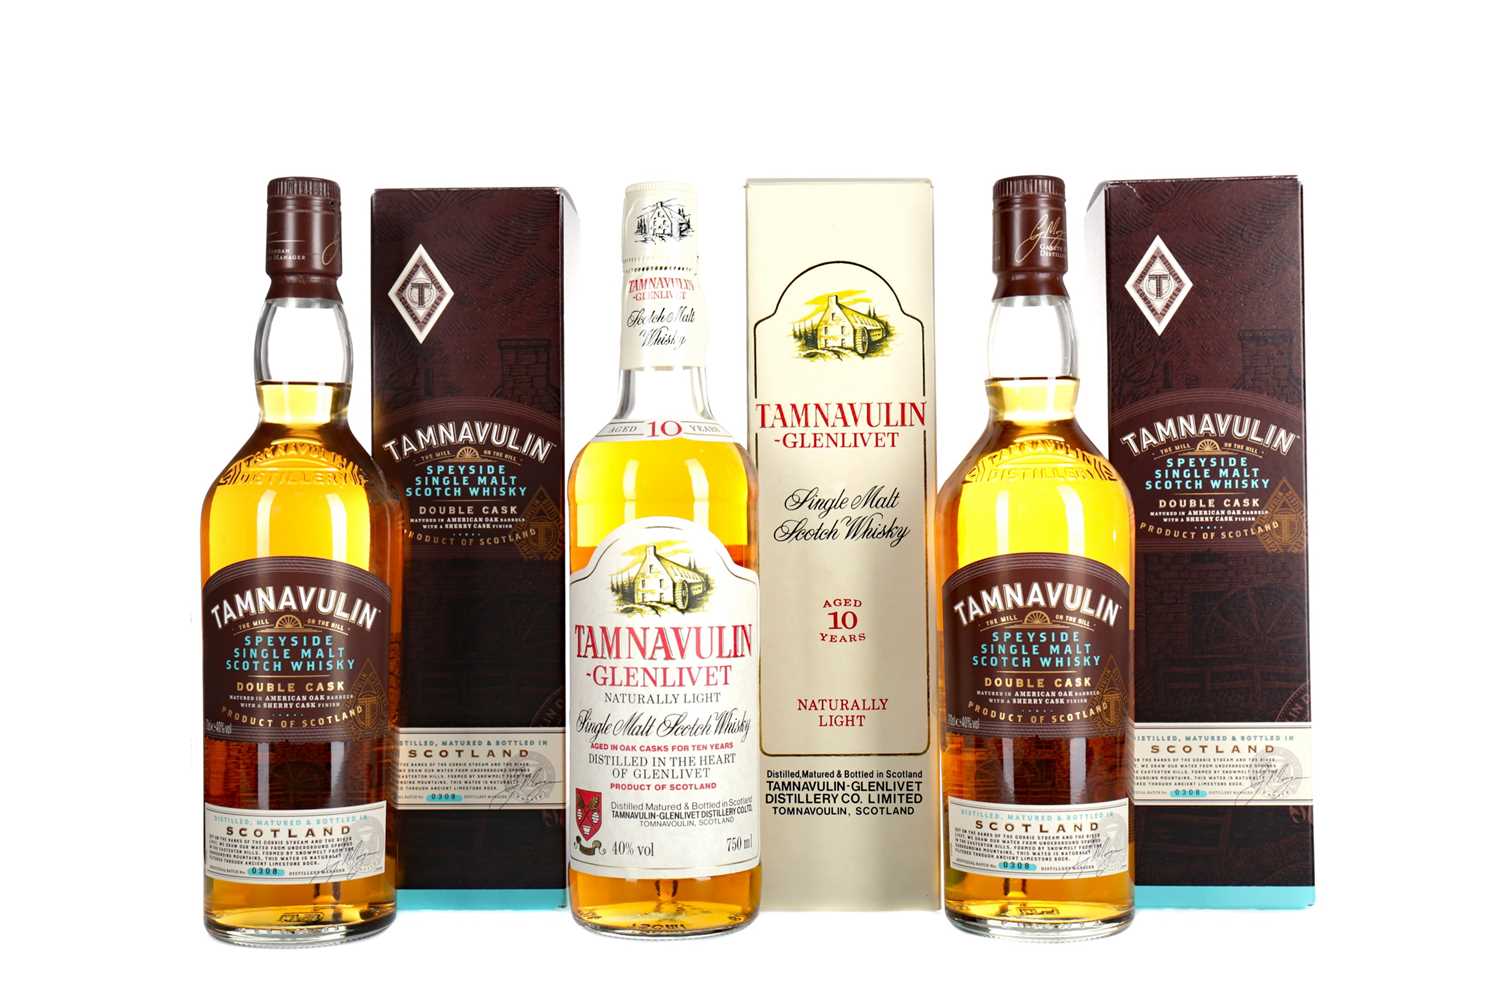 Lot 239 - TAMNAVULIN-GLENLIVET AGED 10 YEARS AND TWO BOTTLES OF TAMNAVULIN DOUBLE CASK